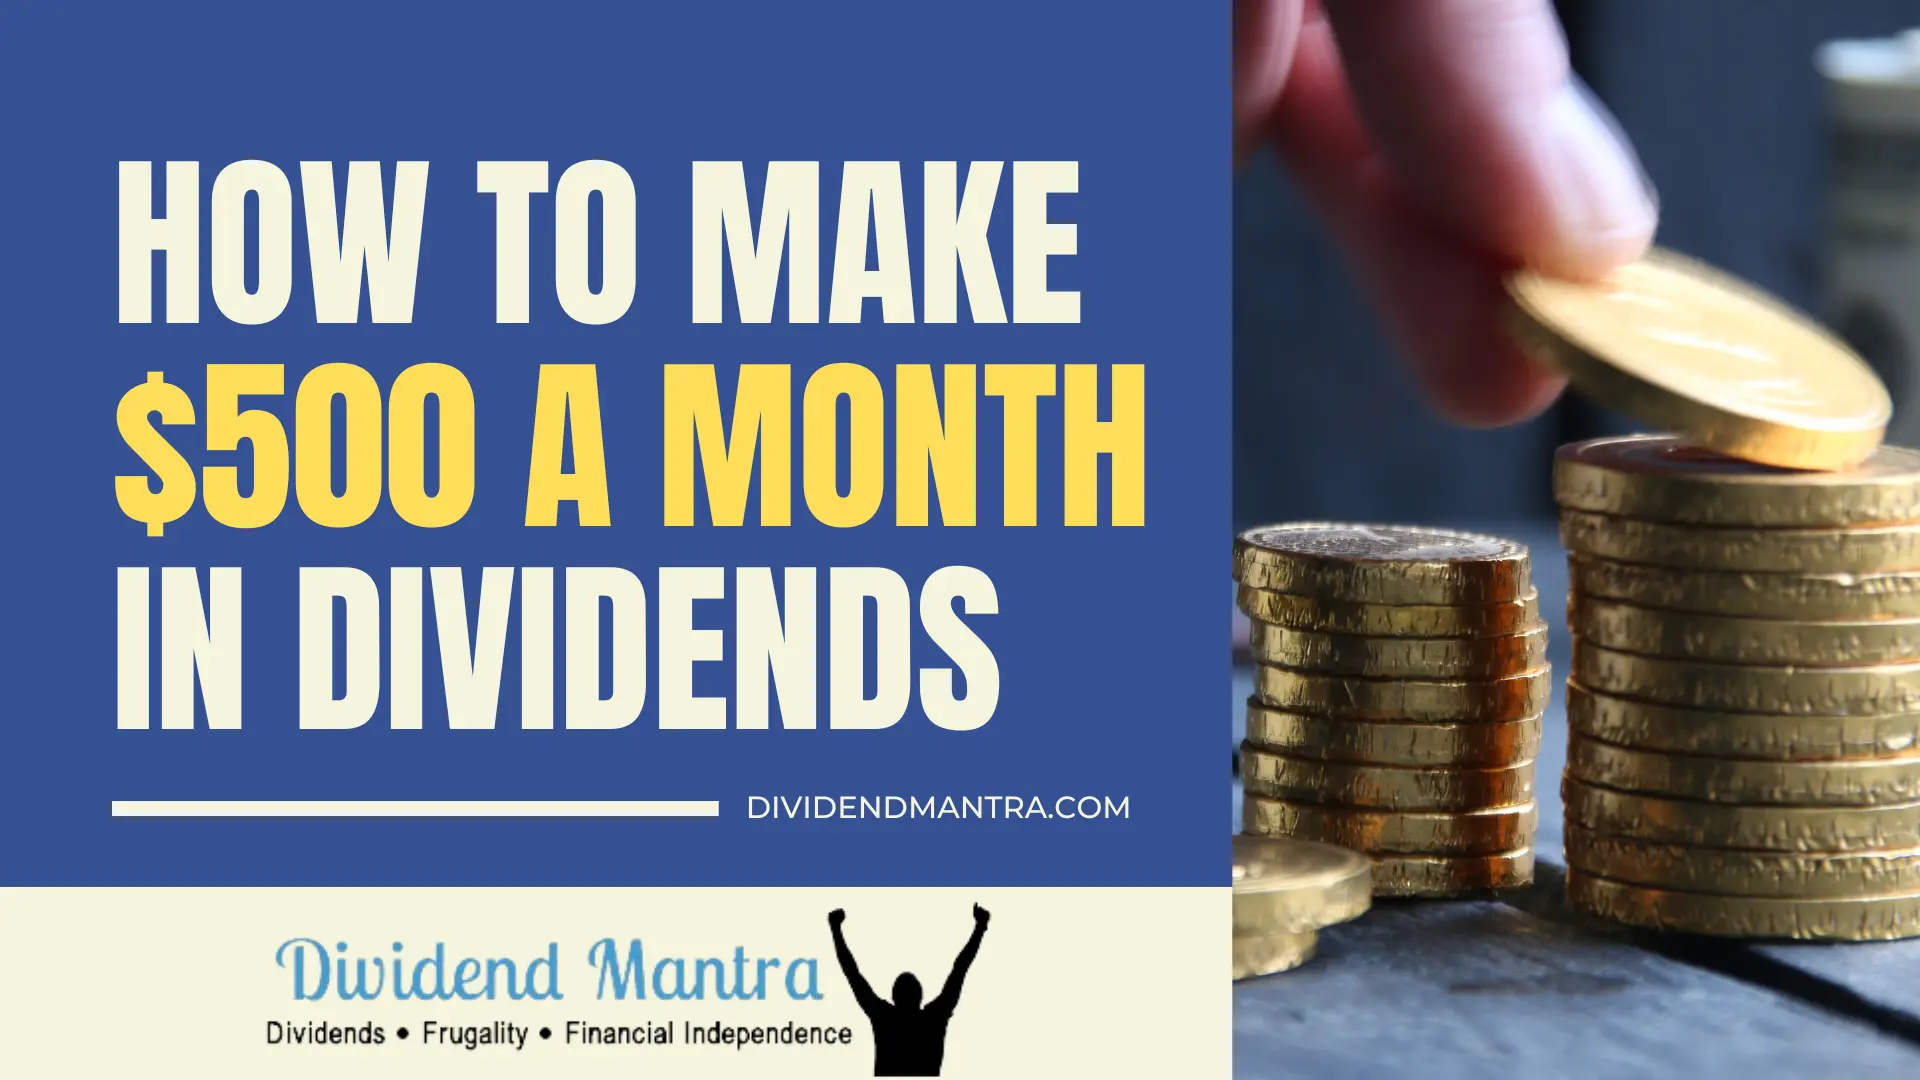 How To Make $500 a Month in Dividends